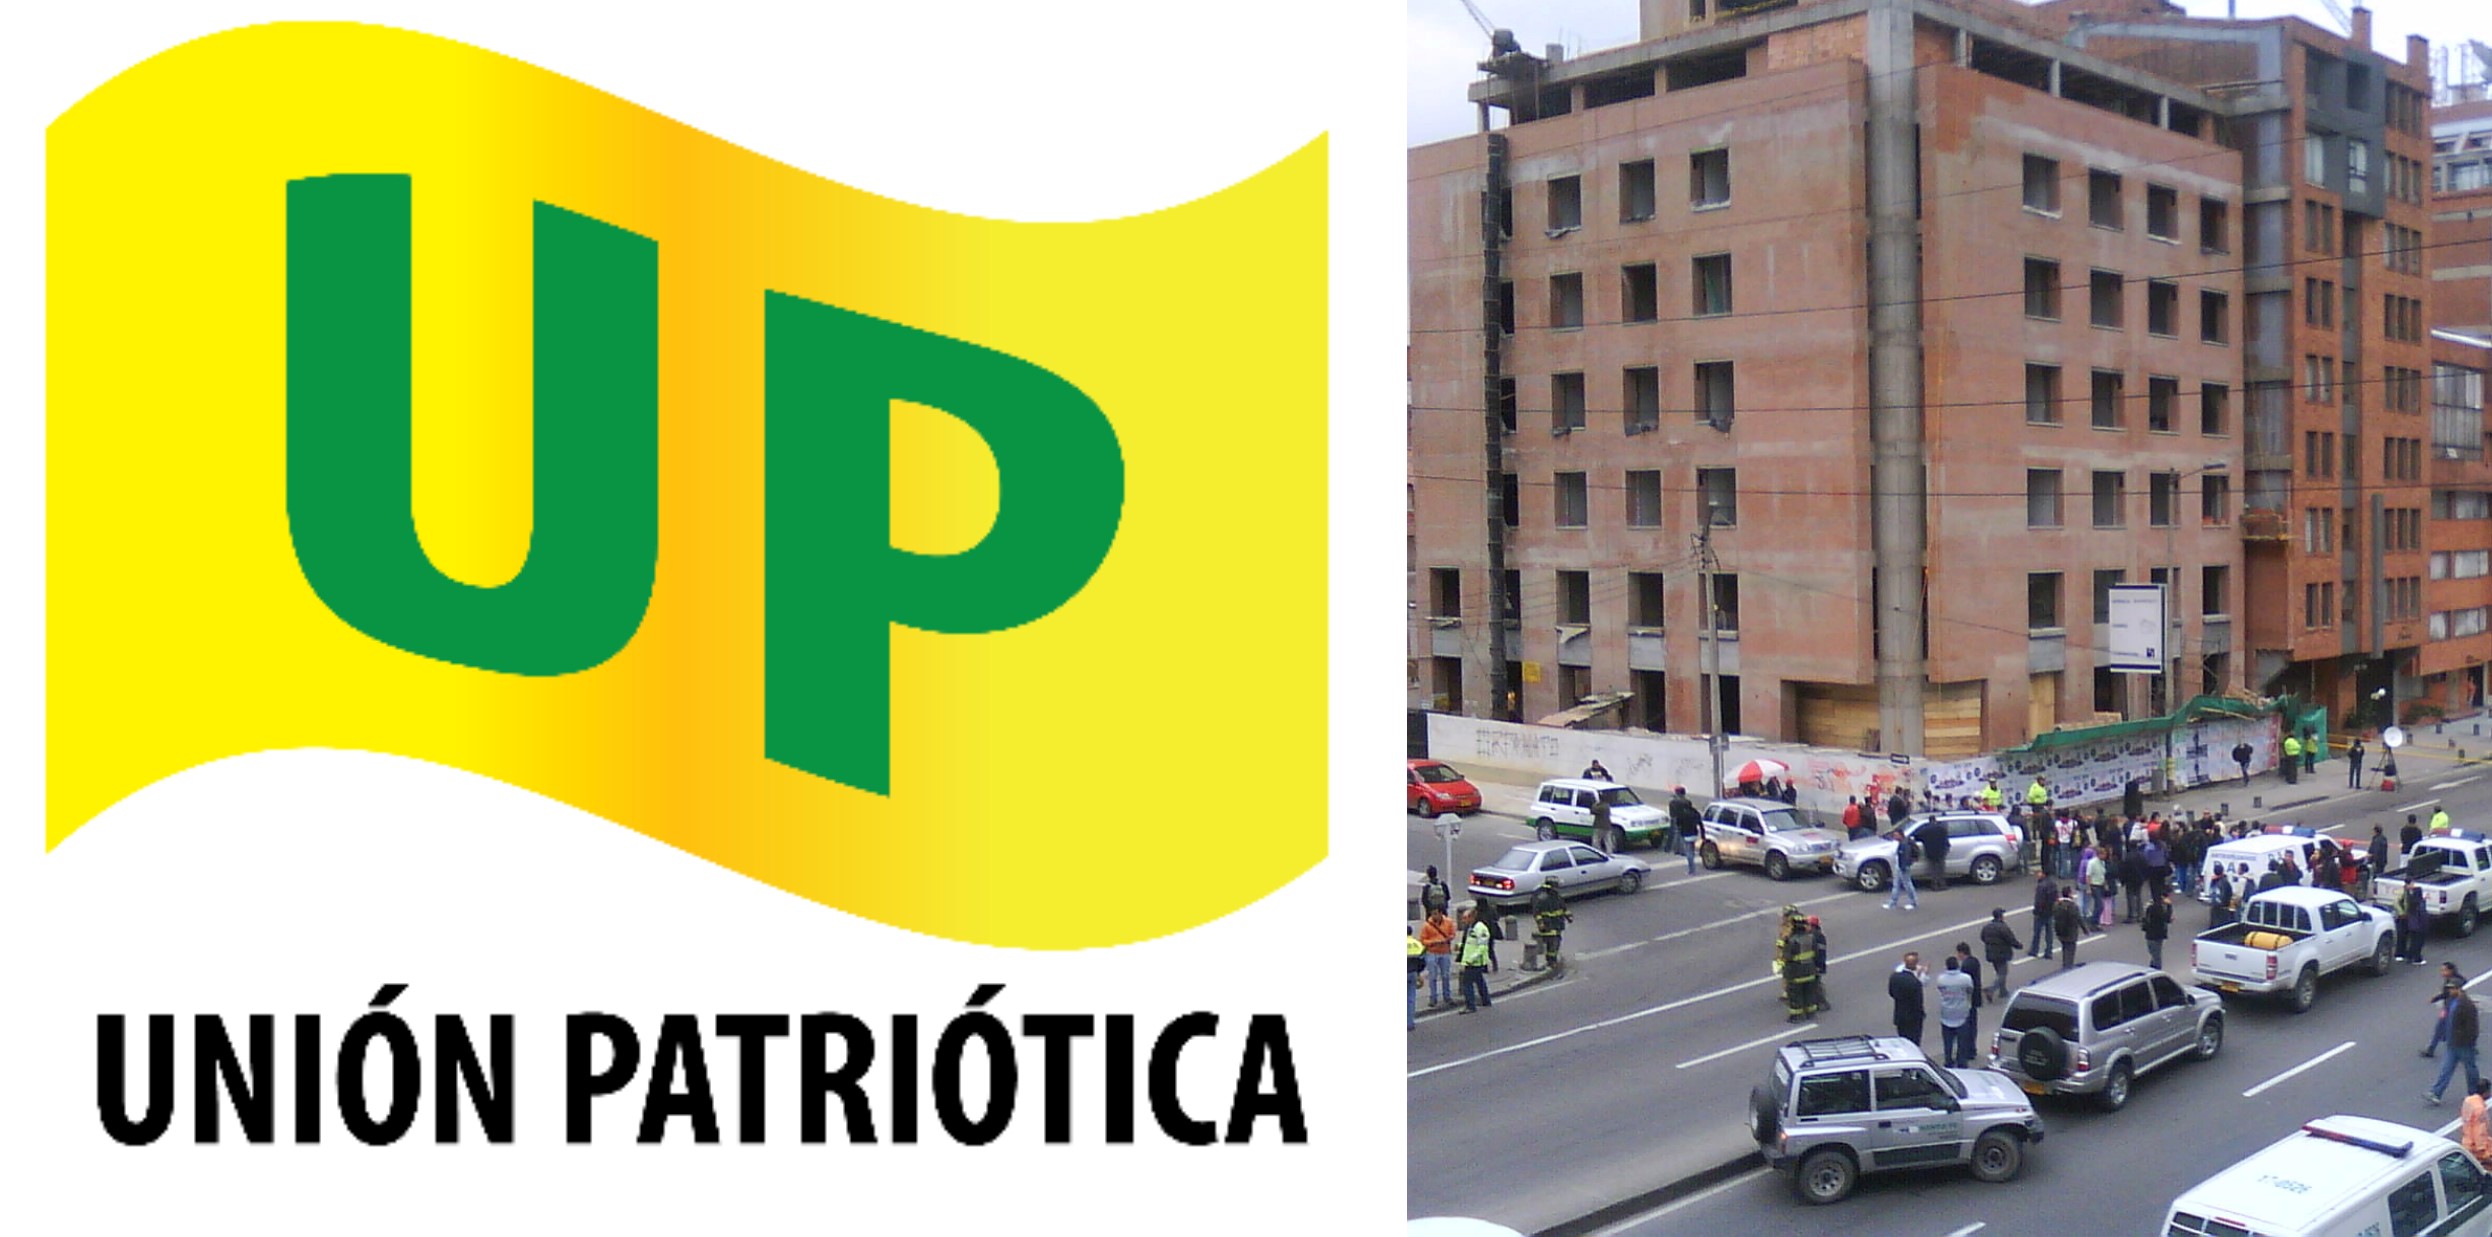 On the left, the flag of the Patriotic Union. On the right, a FARC car bomb attack.